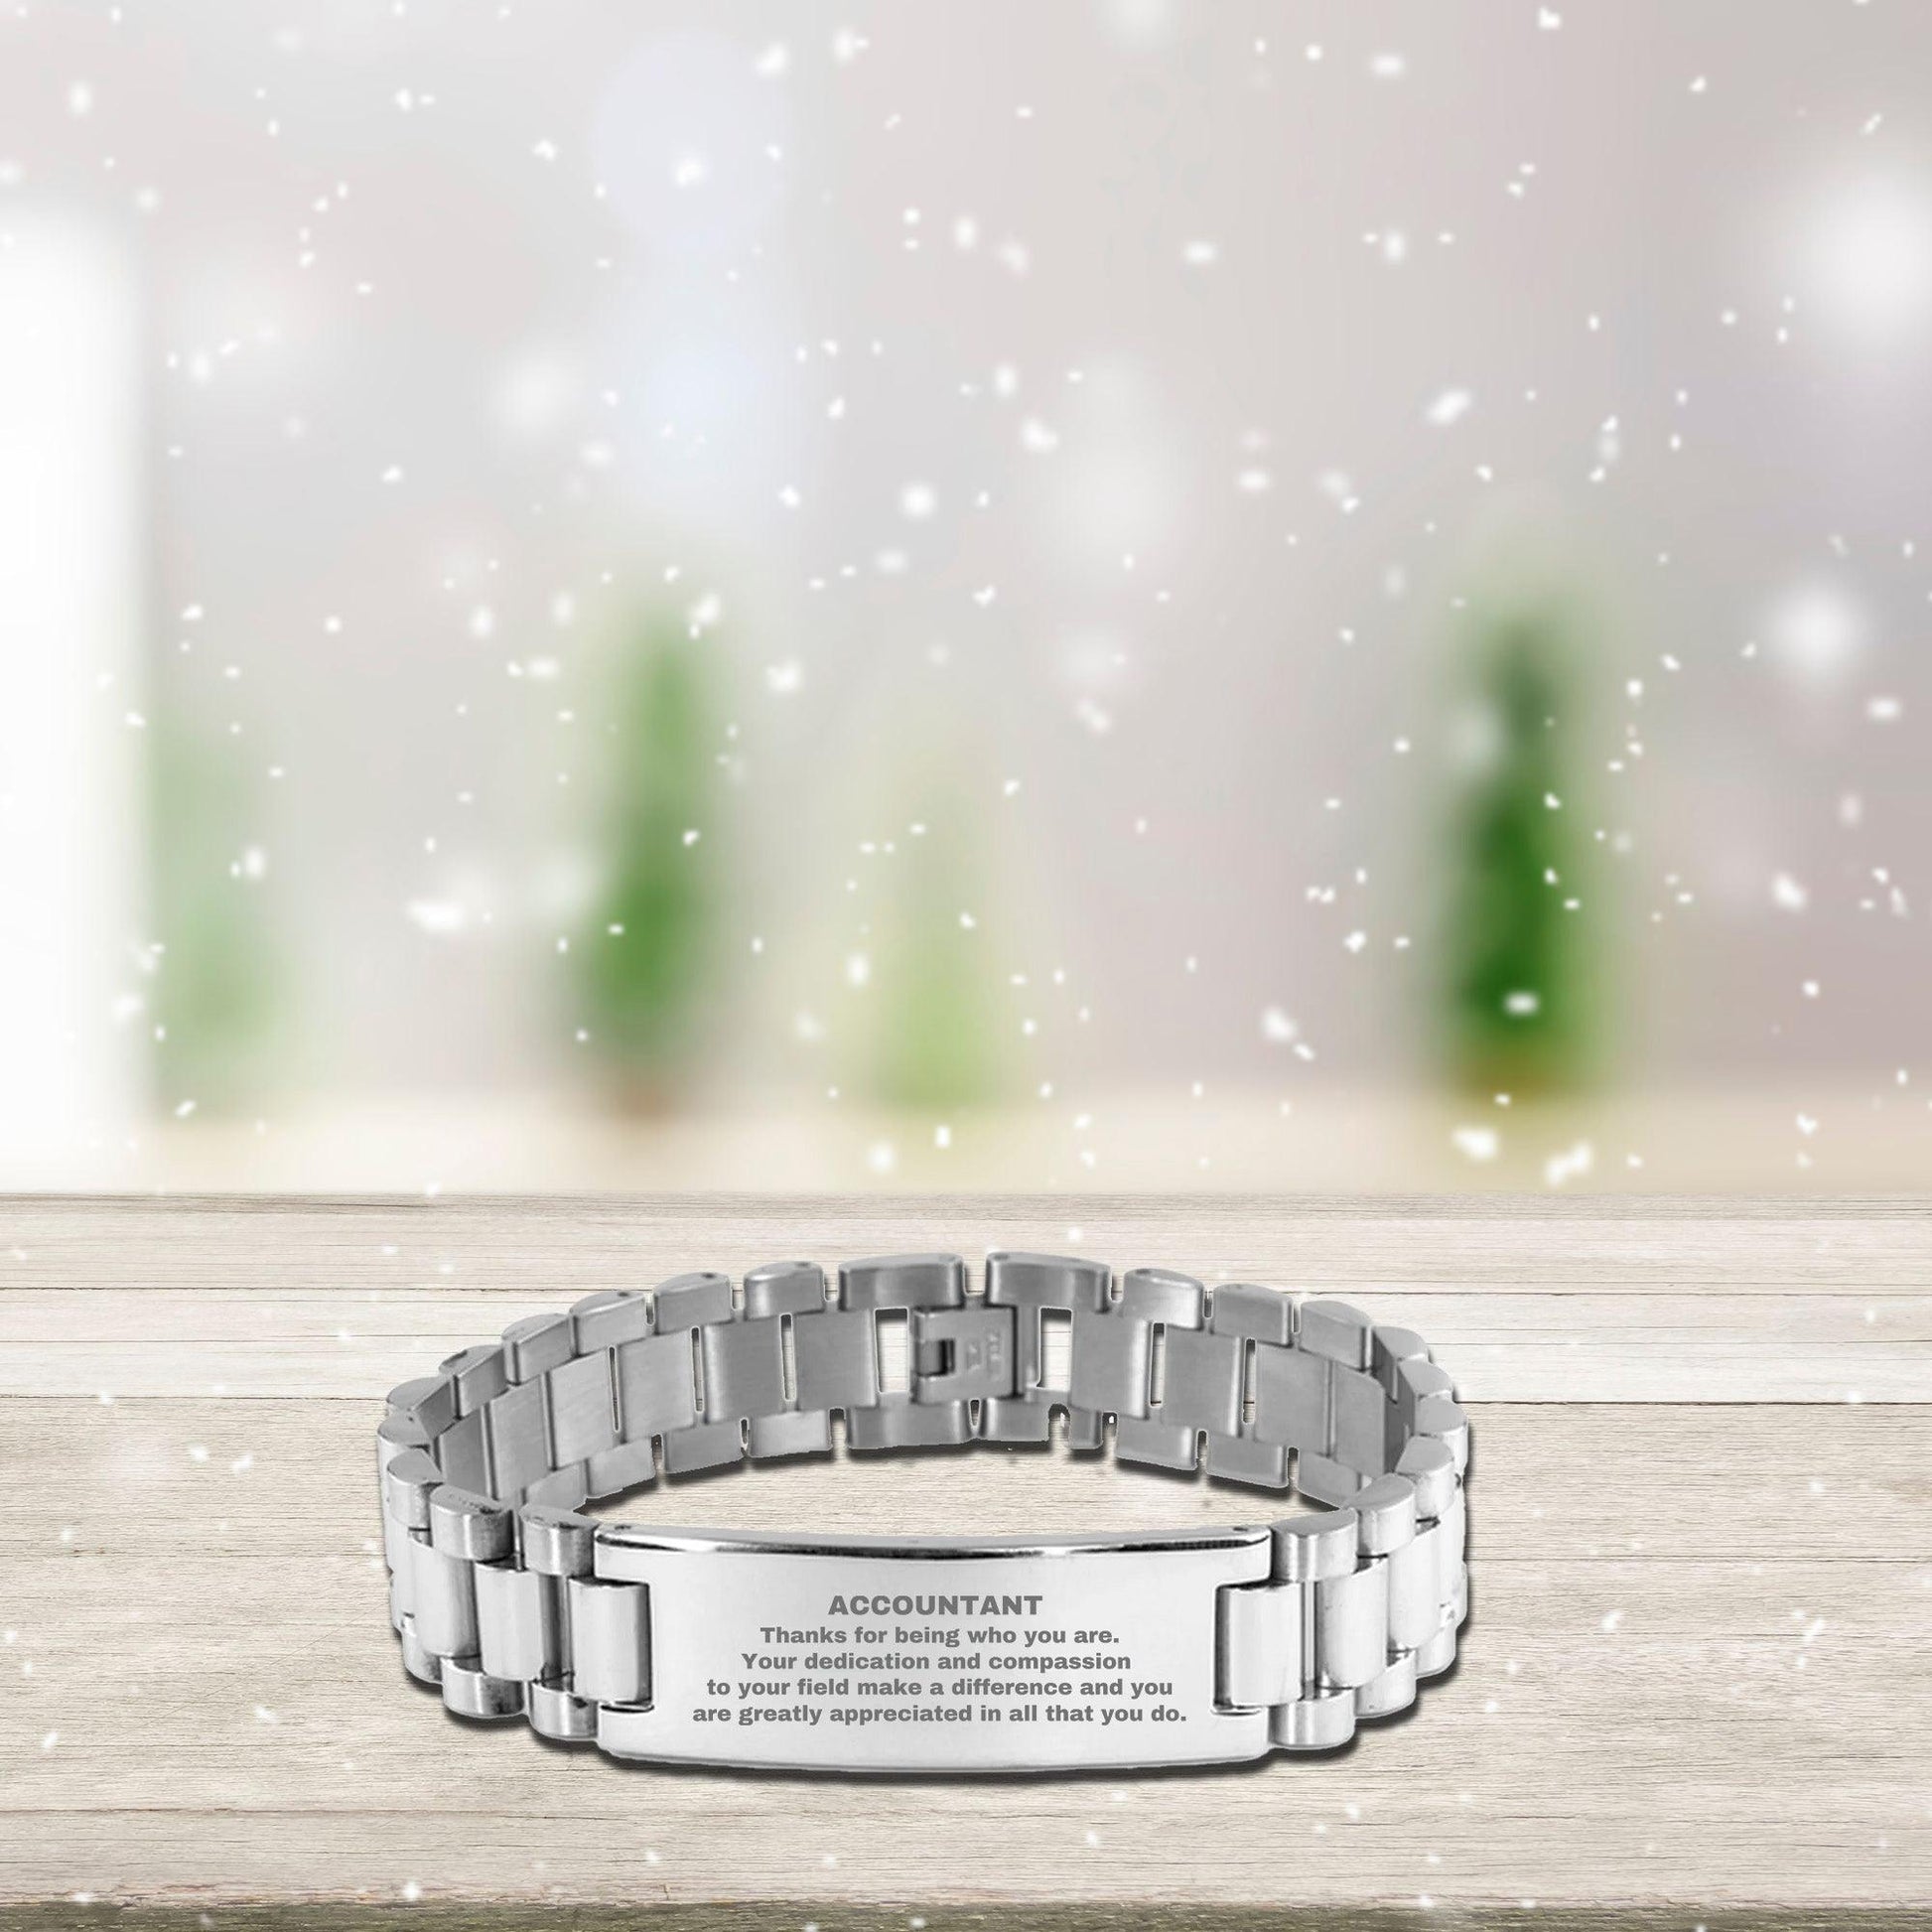 Accountant Ladder Stainless Steel Engraved Bracelet - Thanks for being who you are - Birthday Christmas Jewelry Gifts Coworkers Colleague Boss - Mallard Moon Gift Shop